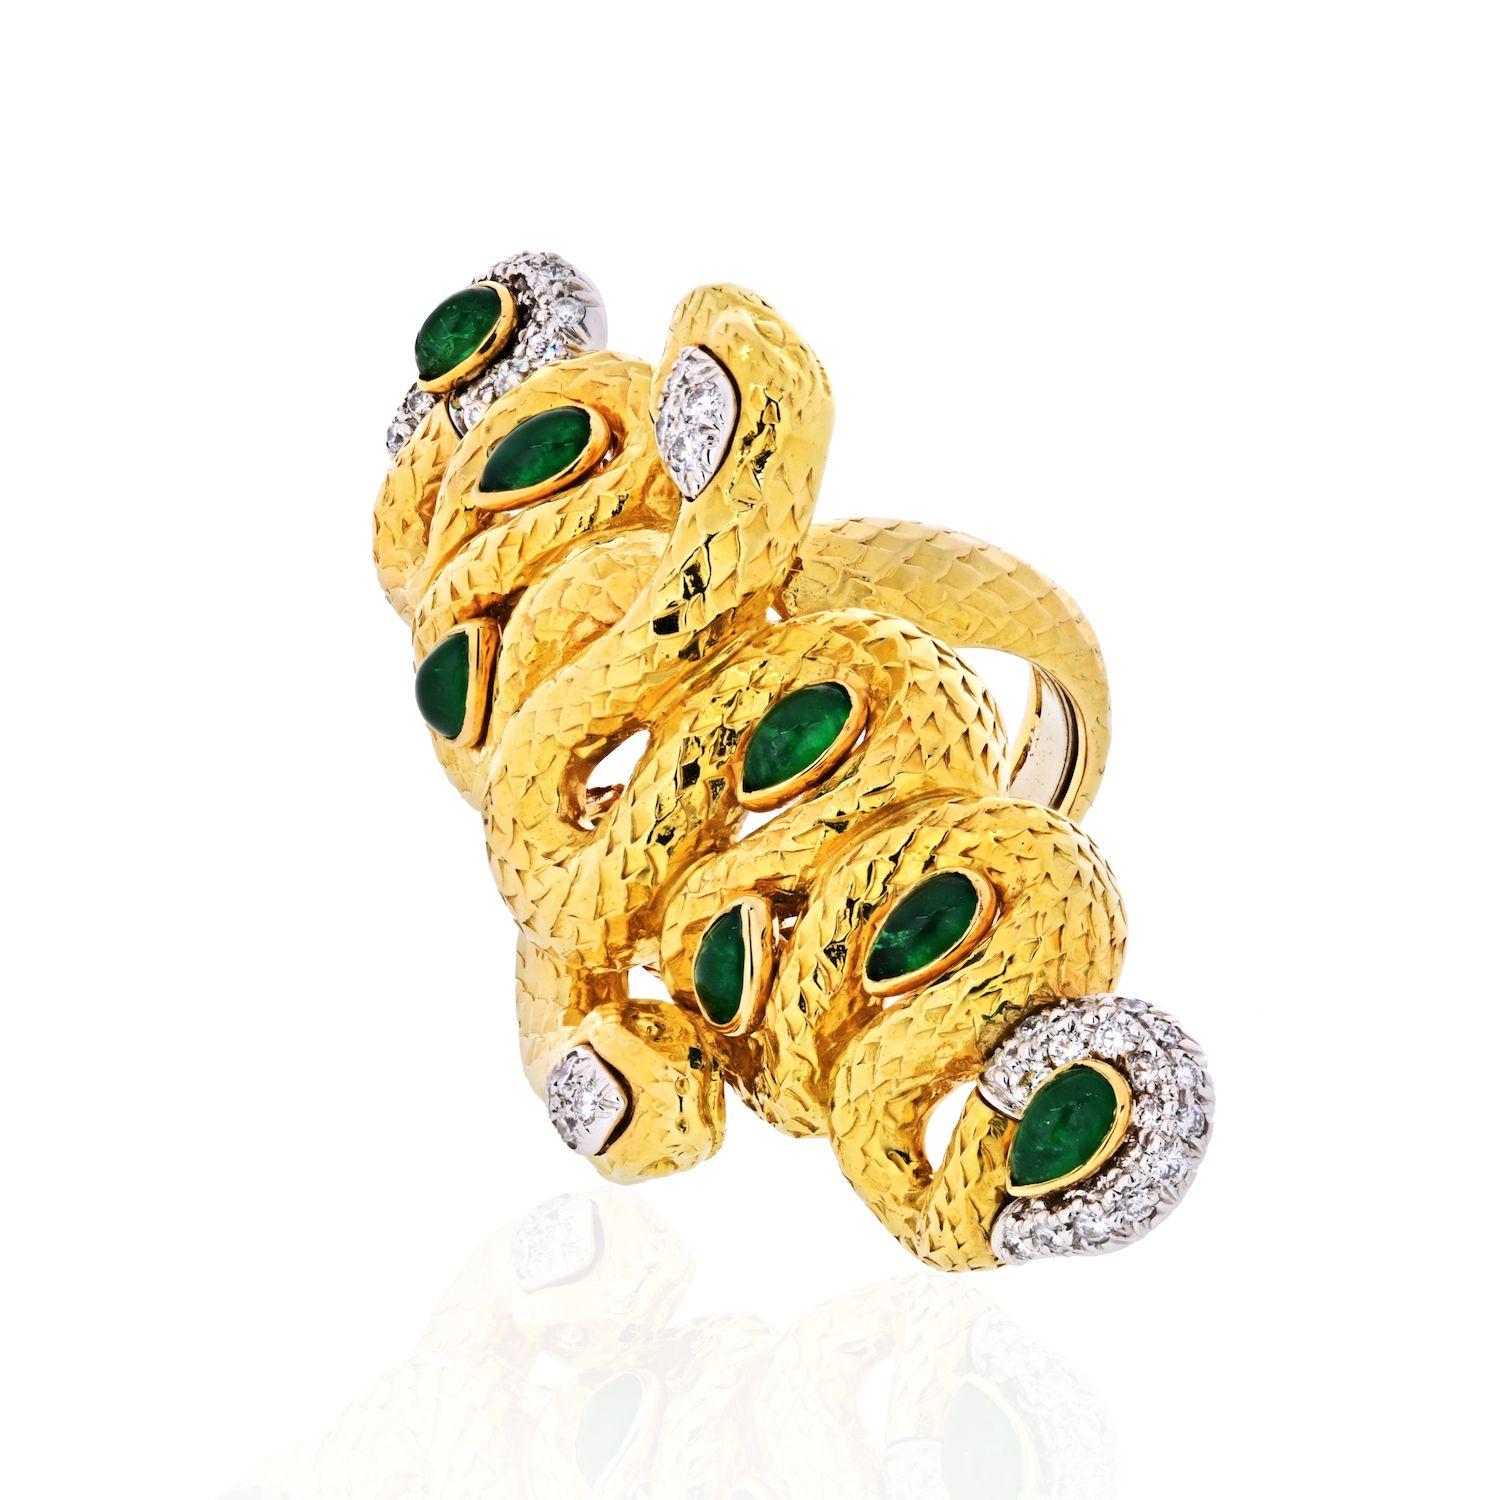 Get lucky with this almost impossible to find David Webb two golden snakes ring. Two substantial size serpents are intertwined and wrapped together creating one intricate look. Set with cabochon emeralds and diamonds the two snakes double headed